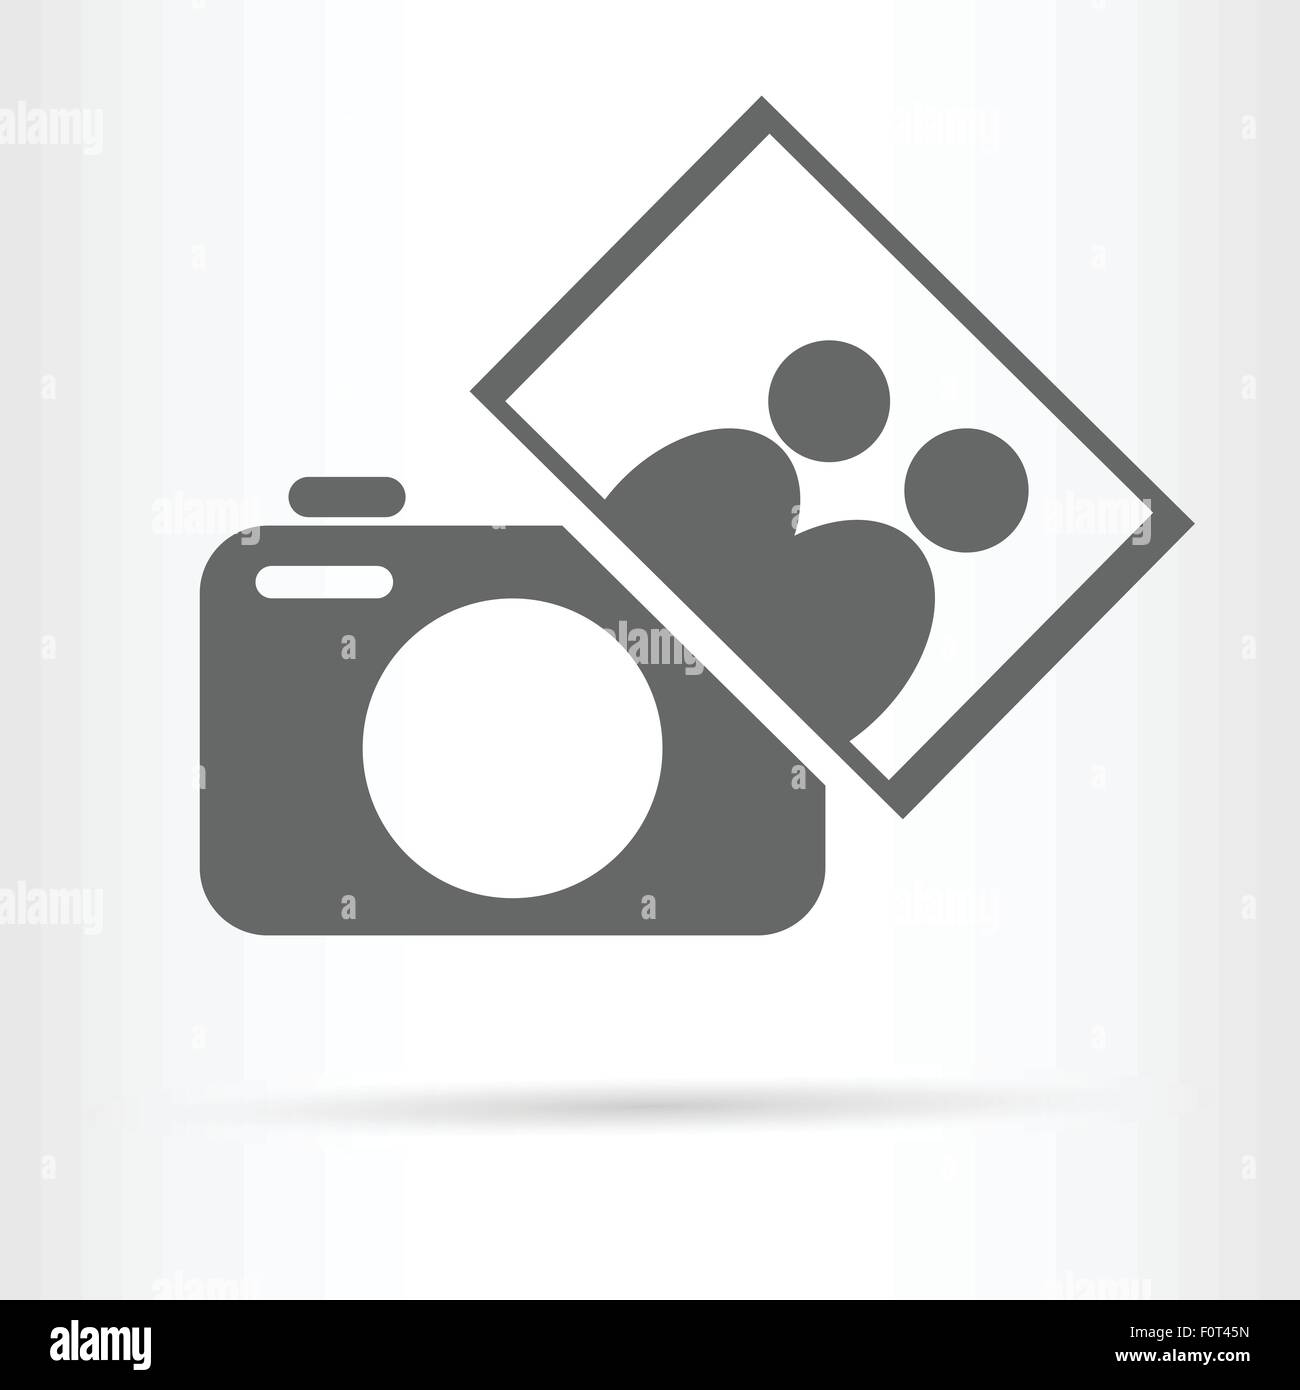 camera with people photo icon vector illustration Stock Vector